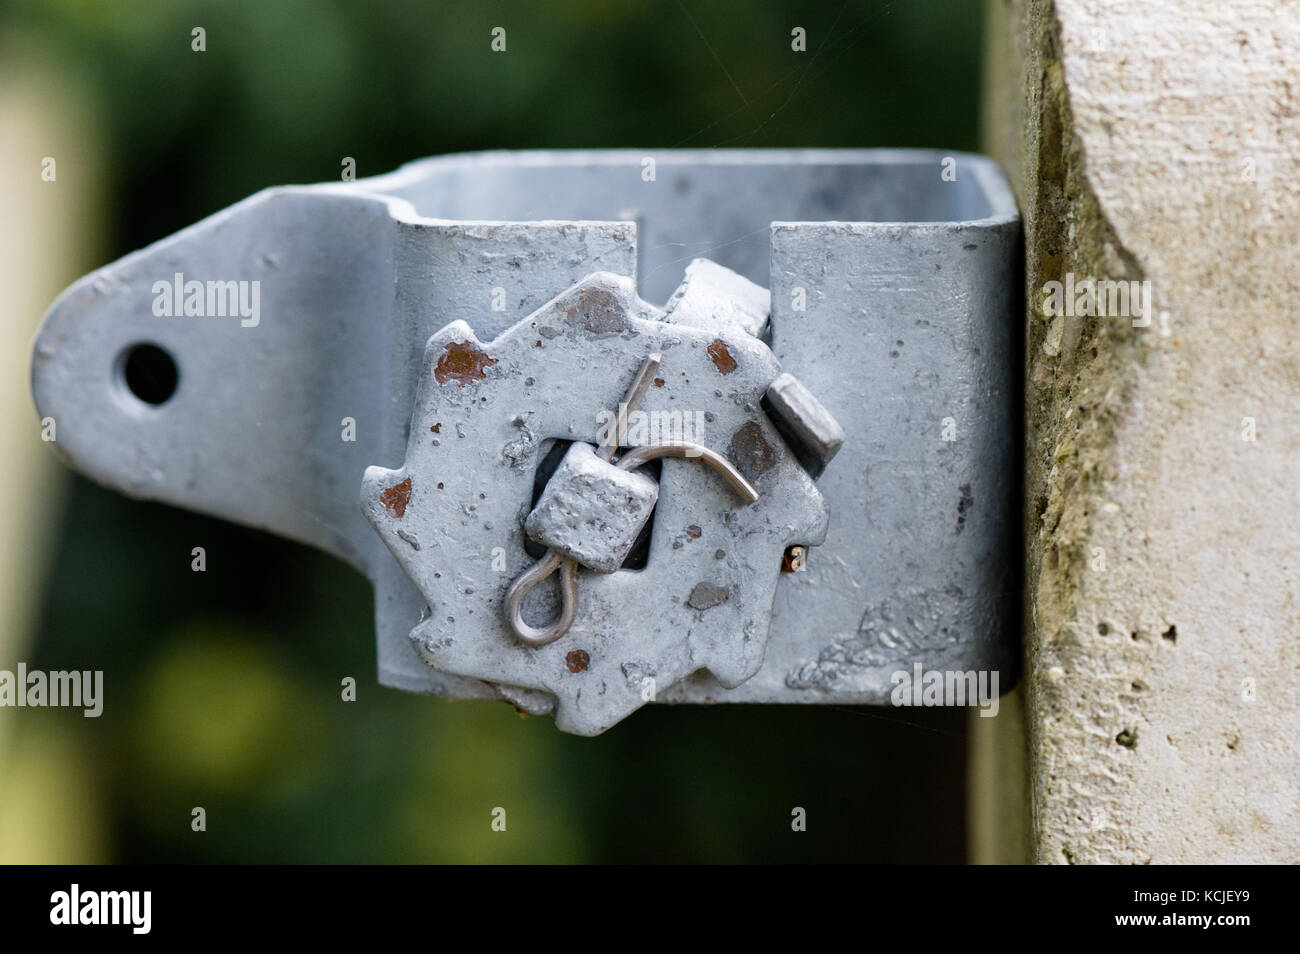 Wire fench ratchet strainer made from galvanised steel. Stock Photo